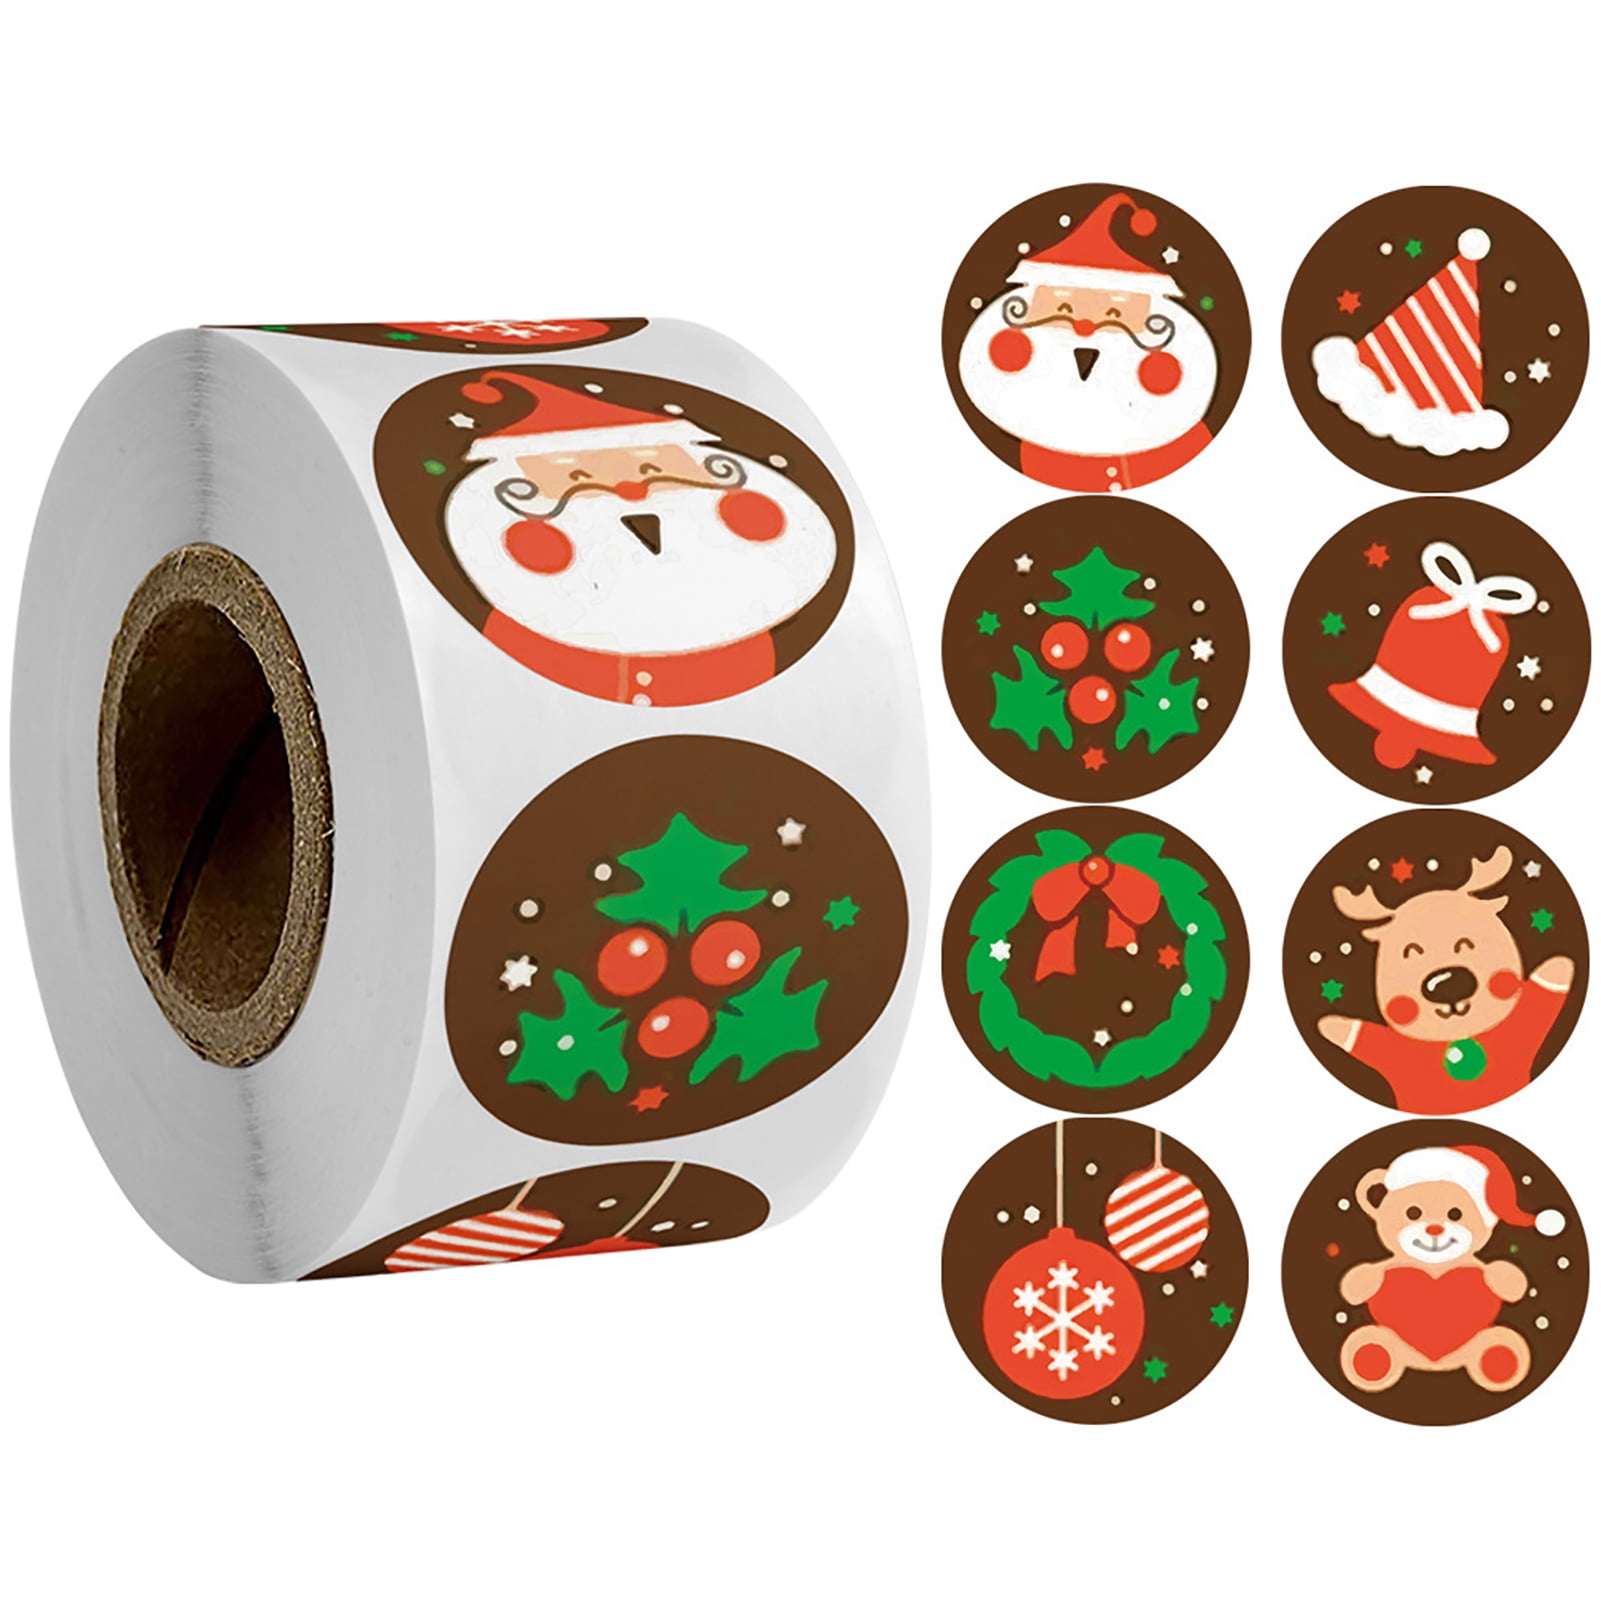 Christmas Stickers,500pcs/roll Round Merry Christmas Stickers Thank You Card Gift Box Package Seal Label Stamp Envelopes Cards Invitations Gift Packages Scrapbooking Decoration